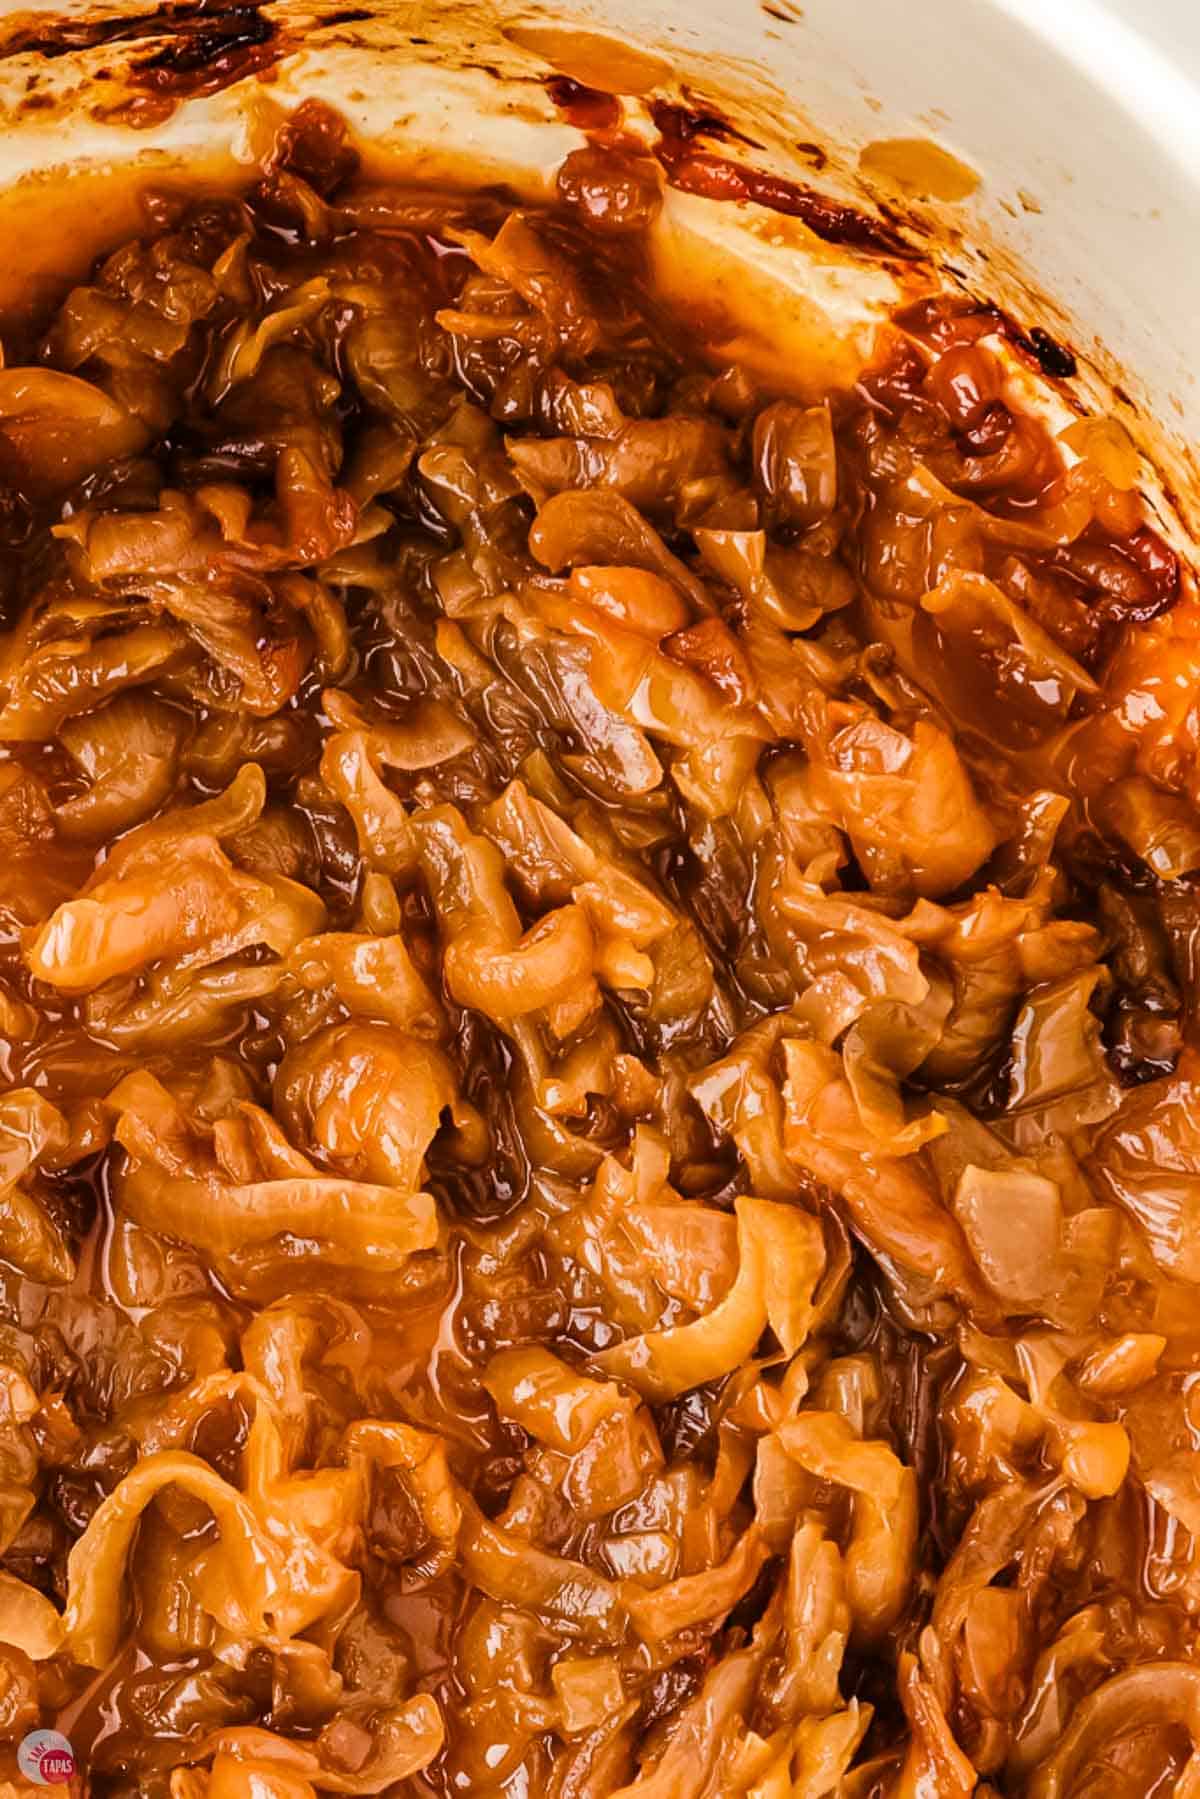 caramelised onions that are great in a delicious french onion soup